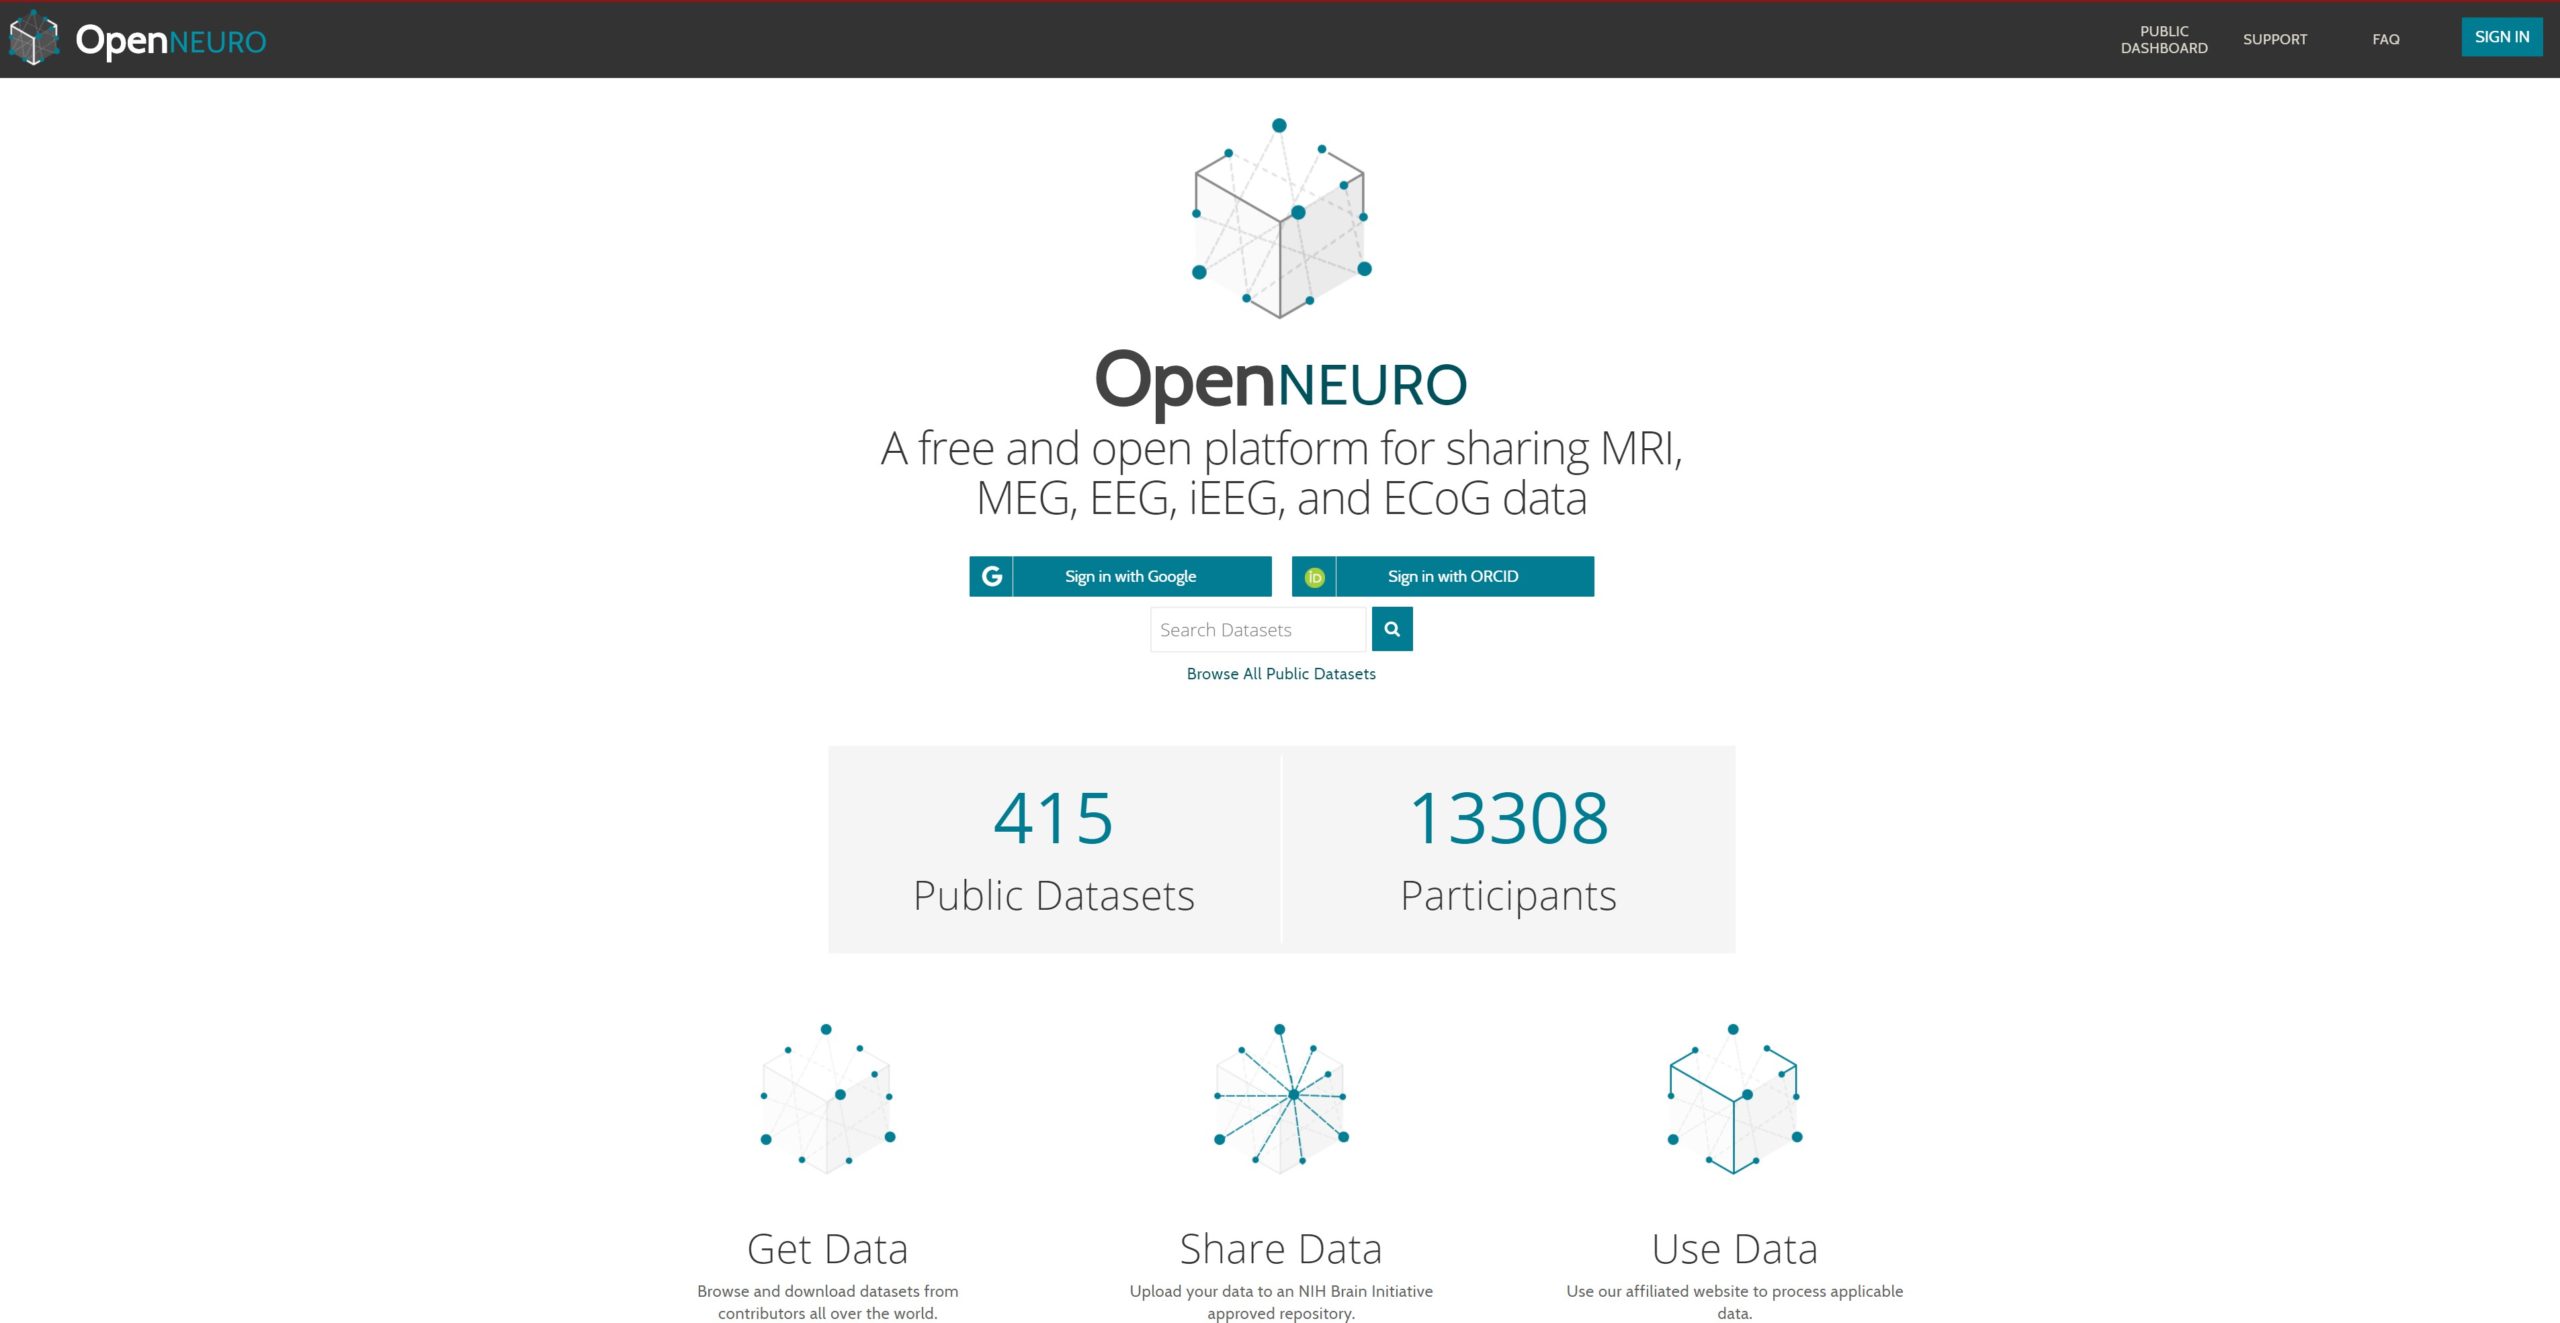 OpenNEURO